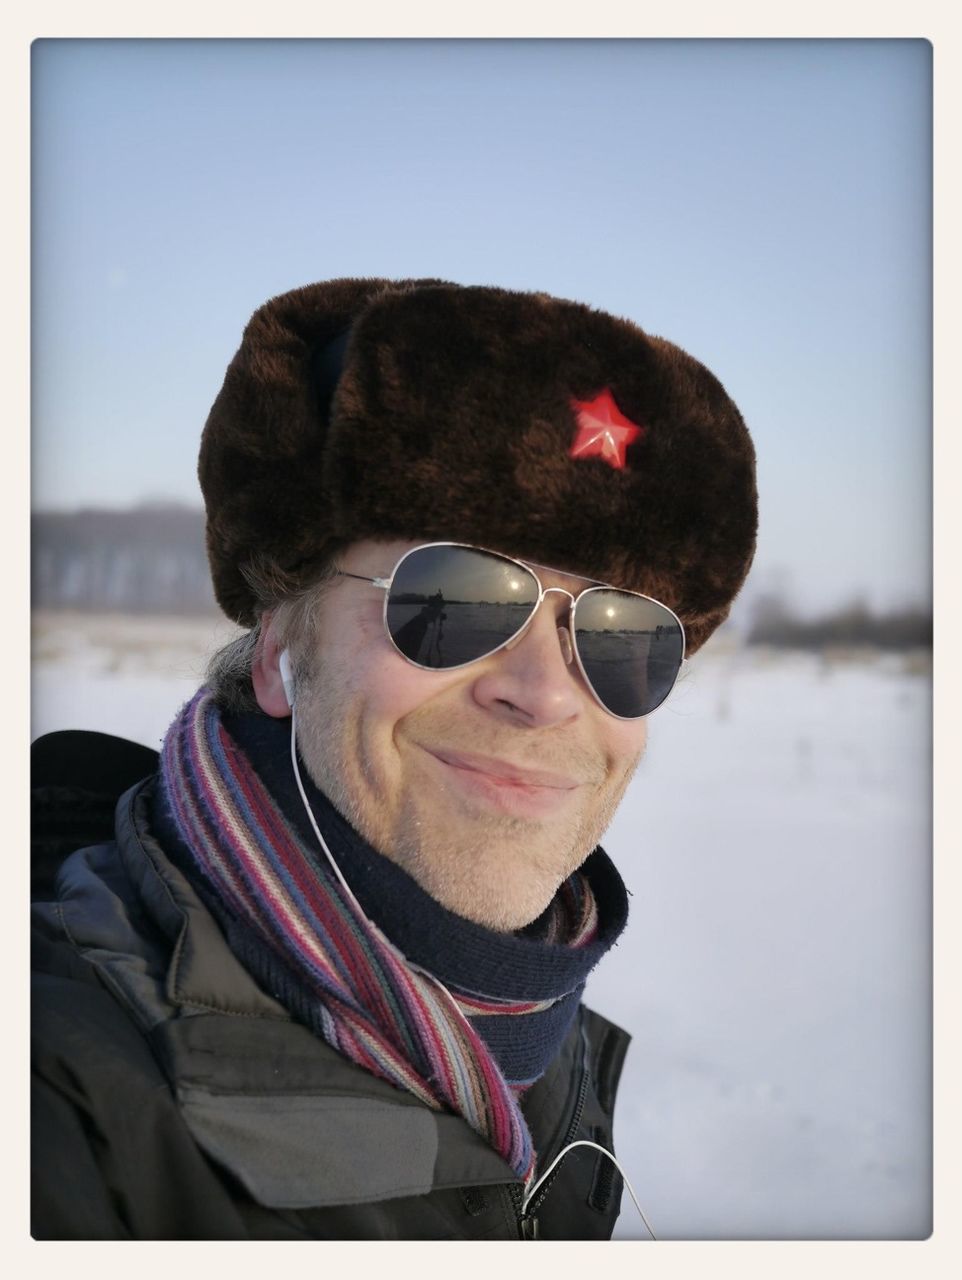 Portrait of smiling mid adult man on snowy field against clear sky